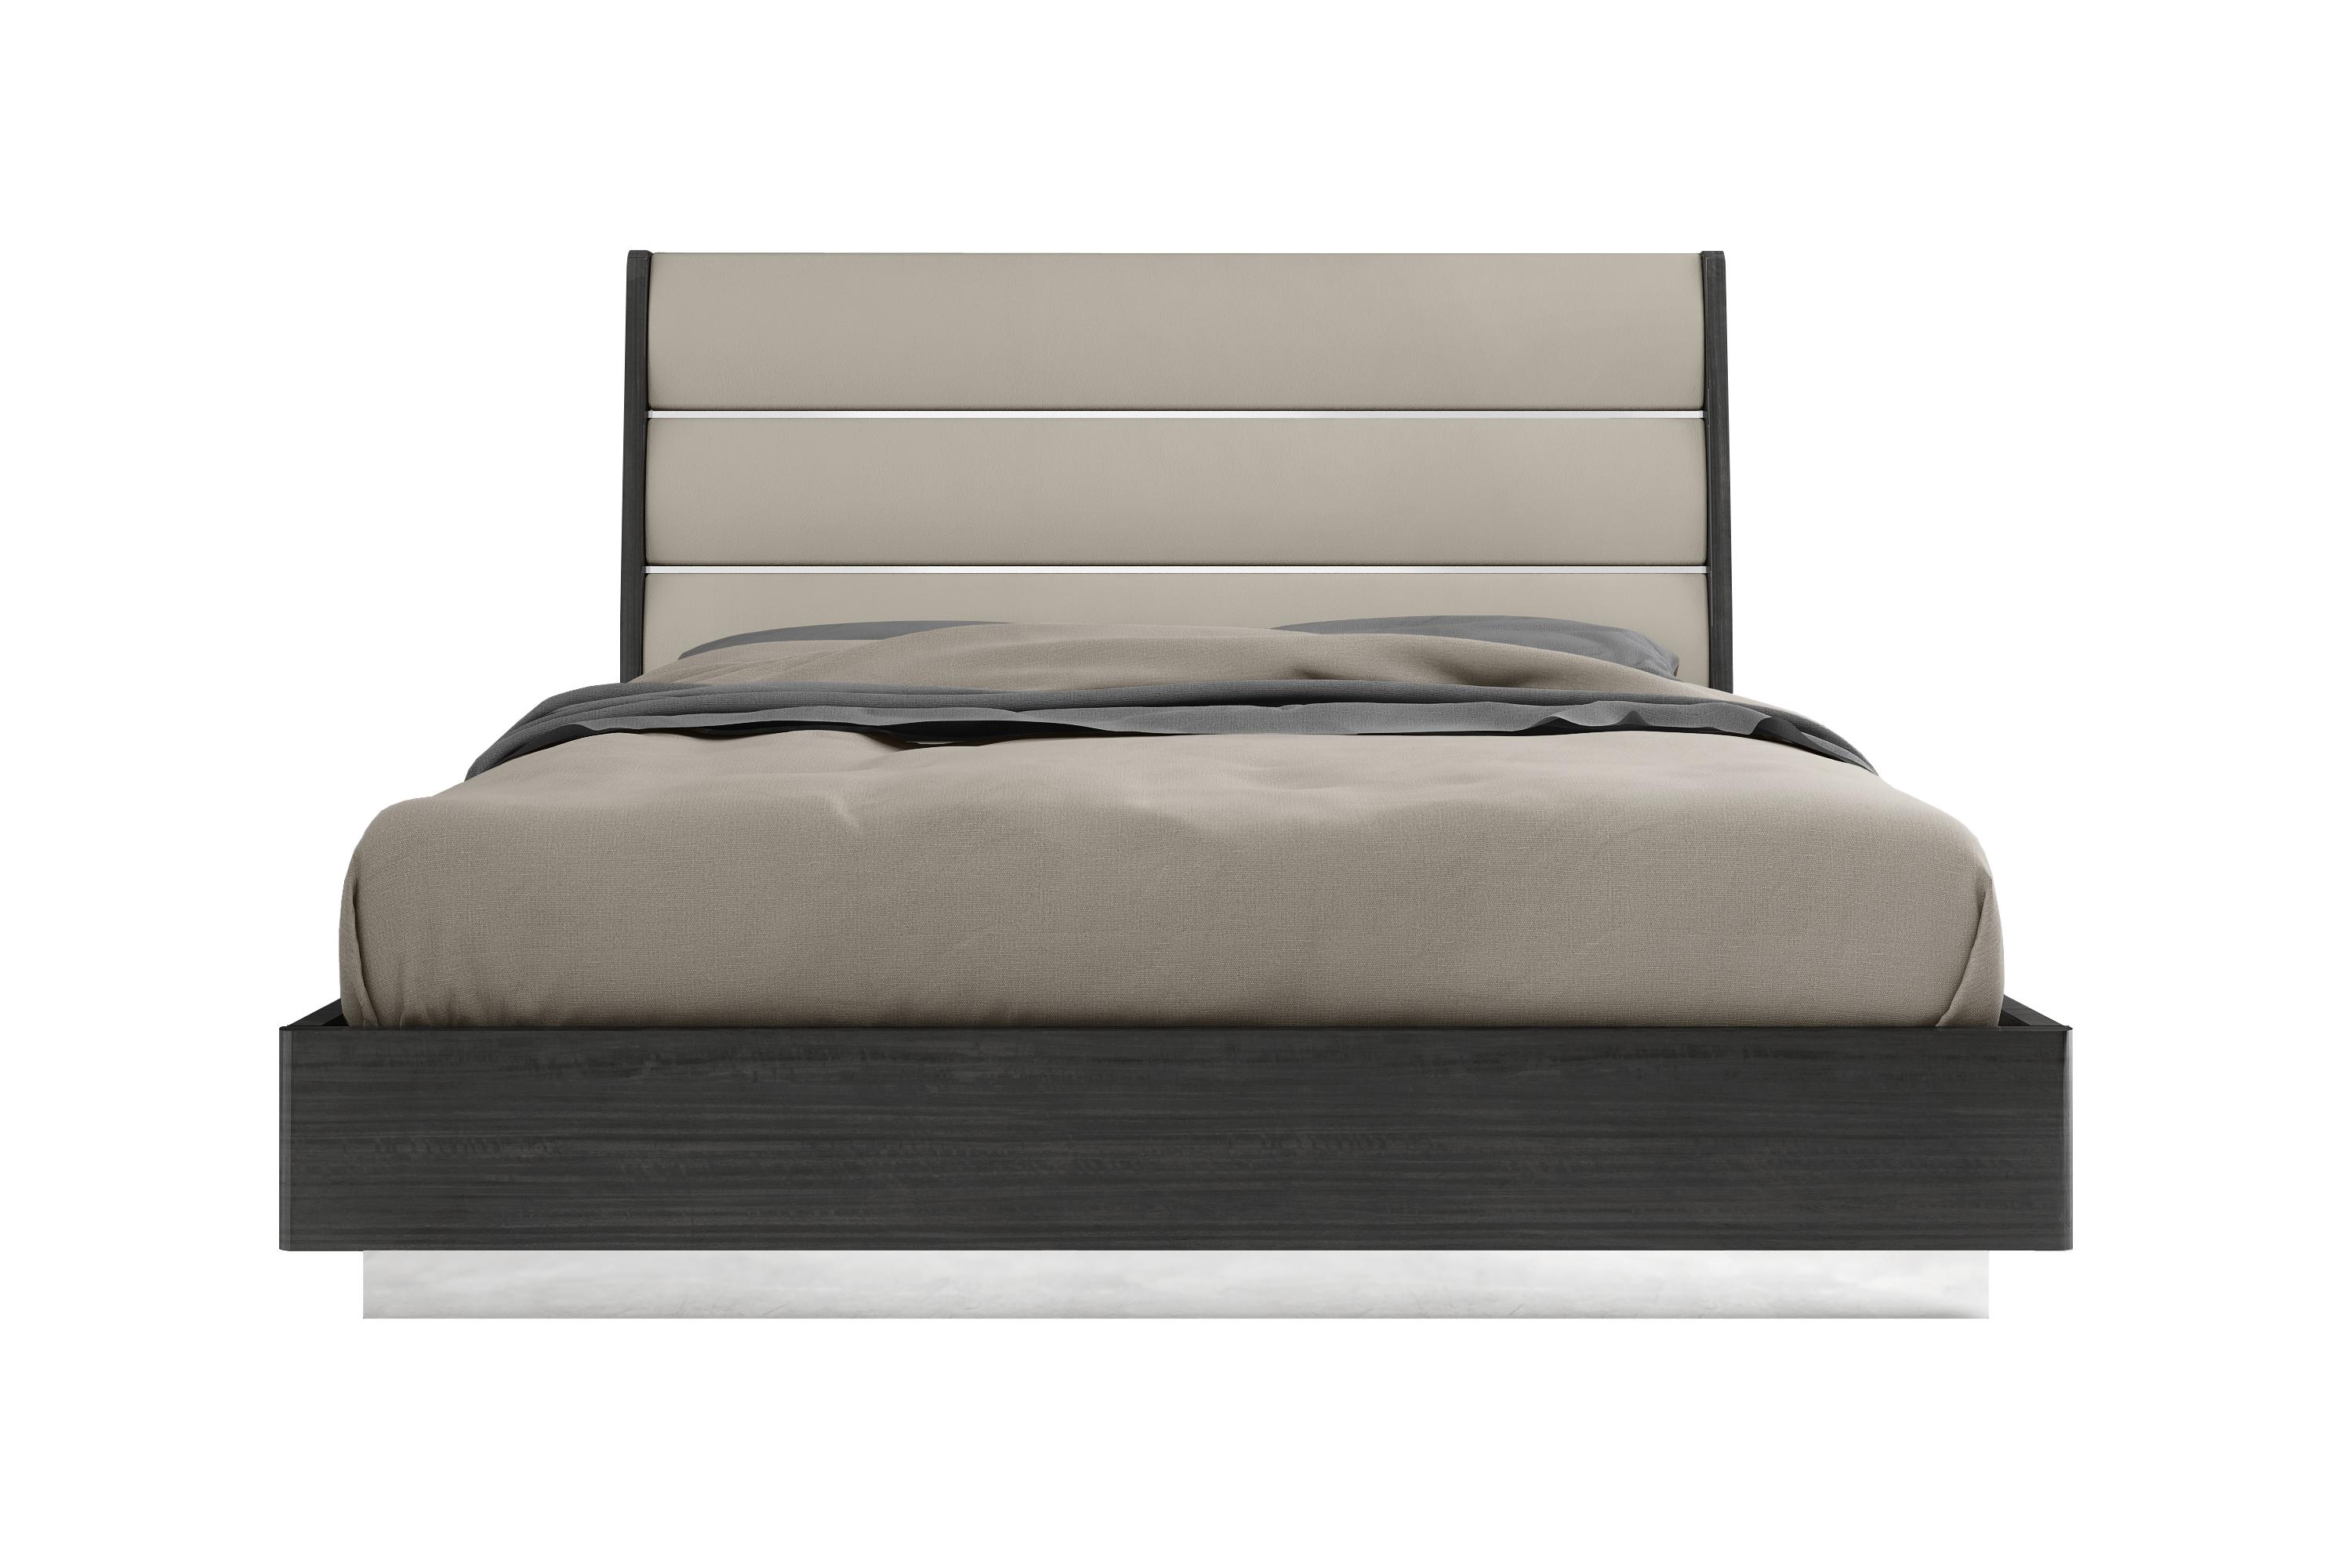 

    
Contemporary High Gloss Dark Gray Faux Leather Queen Bed WhiteLine BQ1752-DGRY/LGRY Pino
